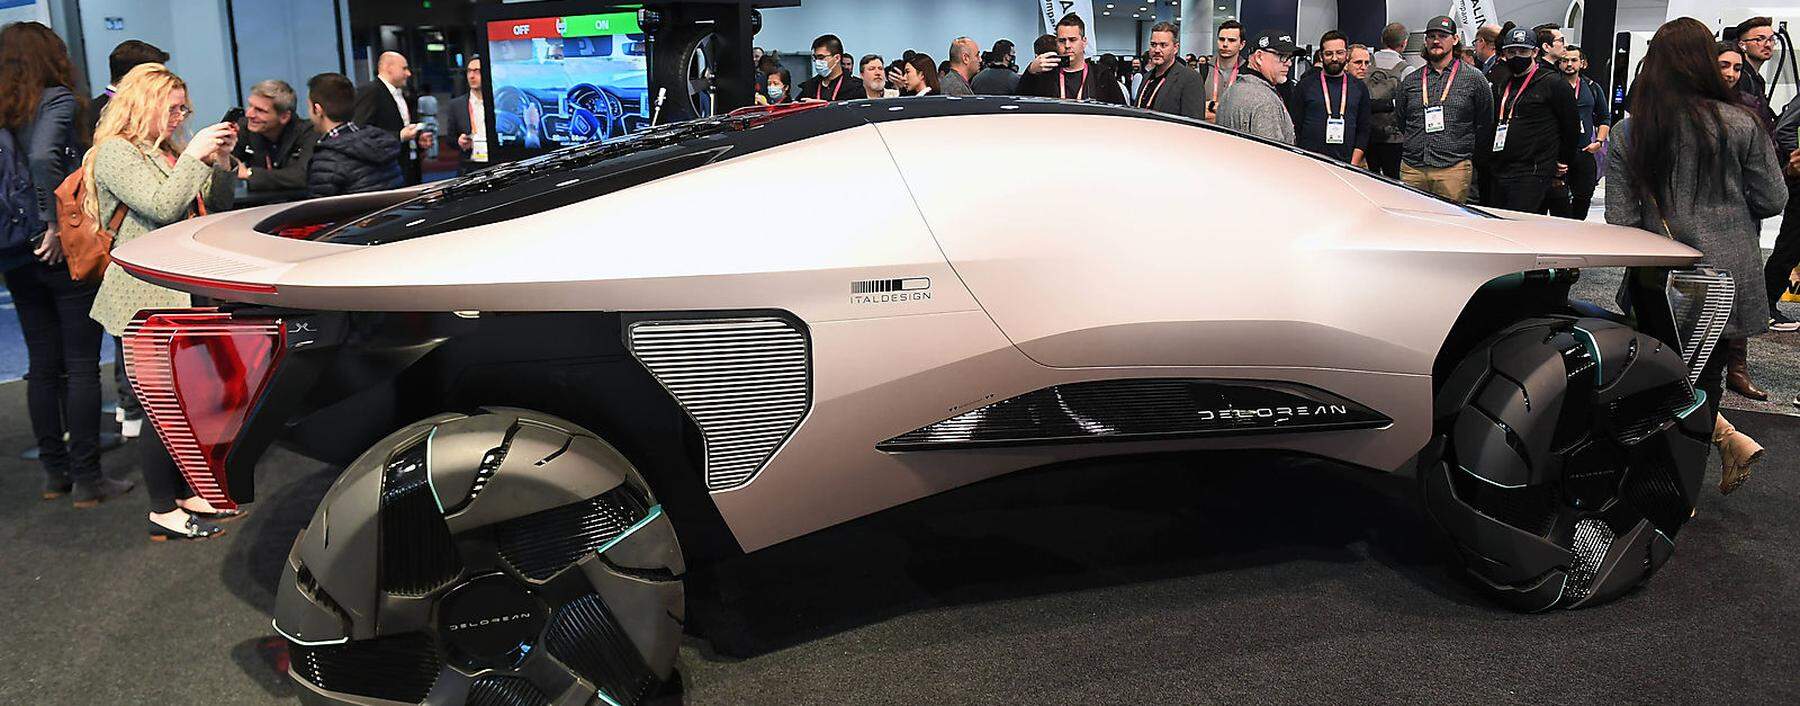 NV: 2023 CES Day 2 A DeLorean Omega offroad concept car is displayed during CES 2023 at the Las Vegas Convention Center